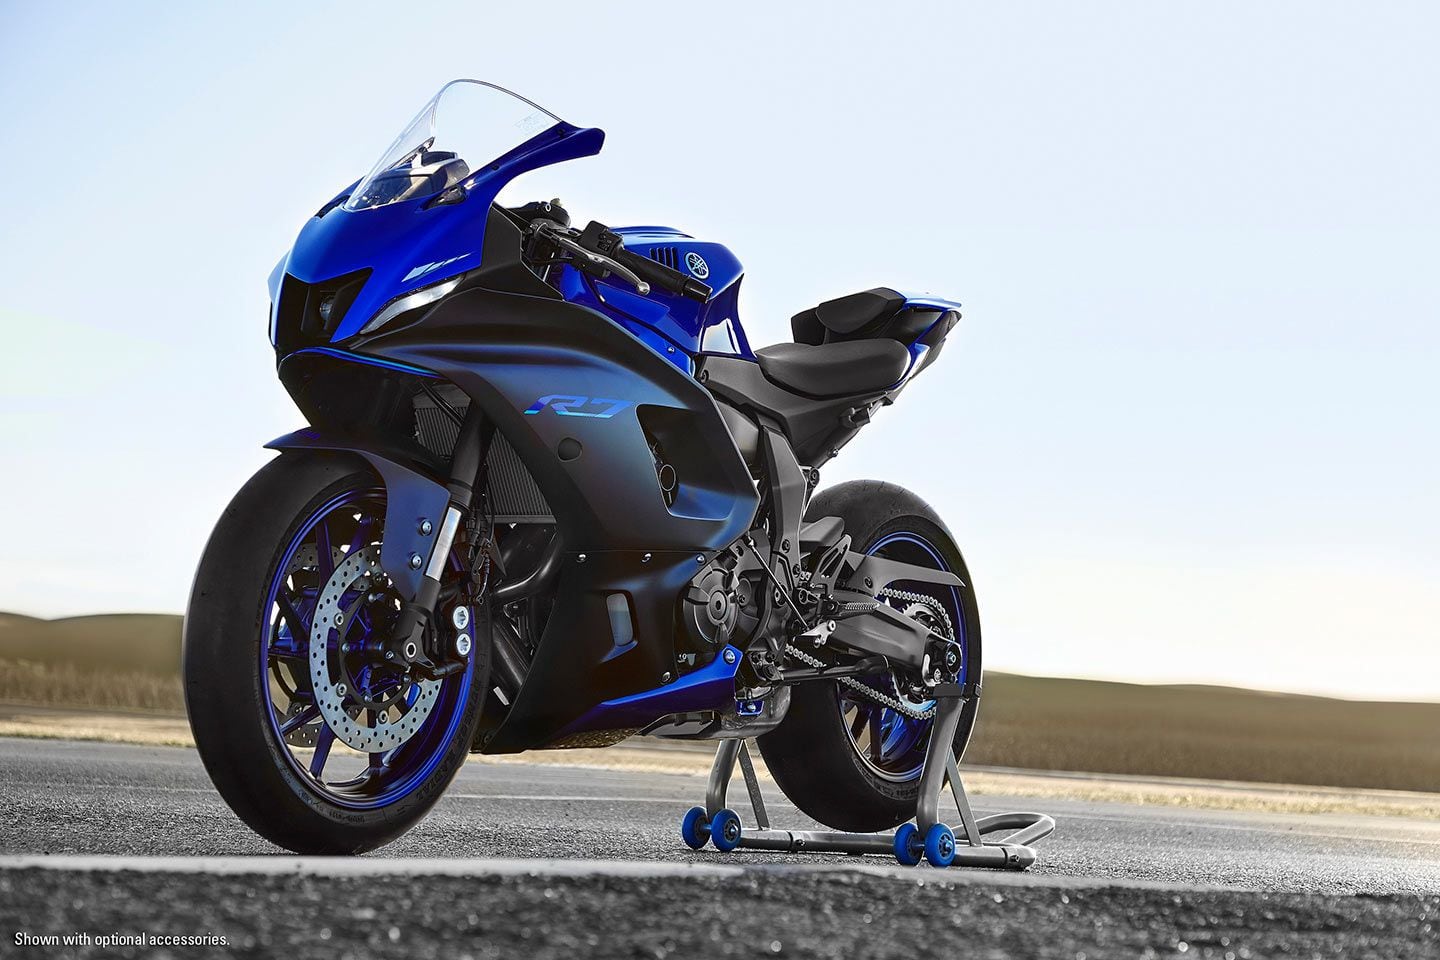 Yamaha R6: Two new track-only bikes for 2022